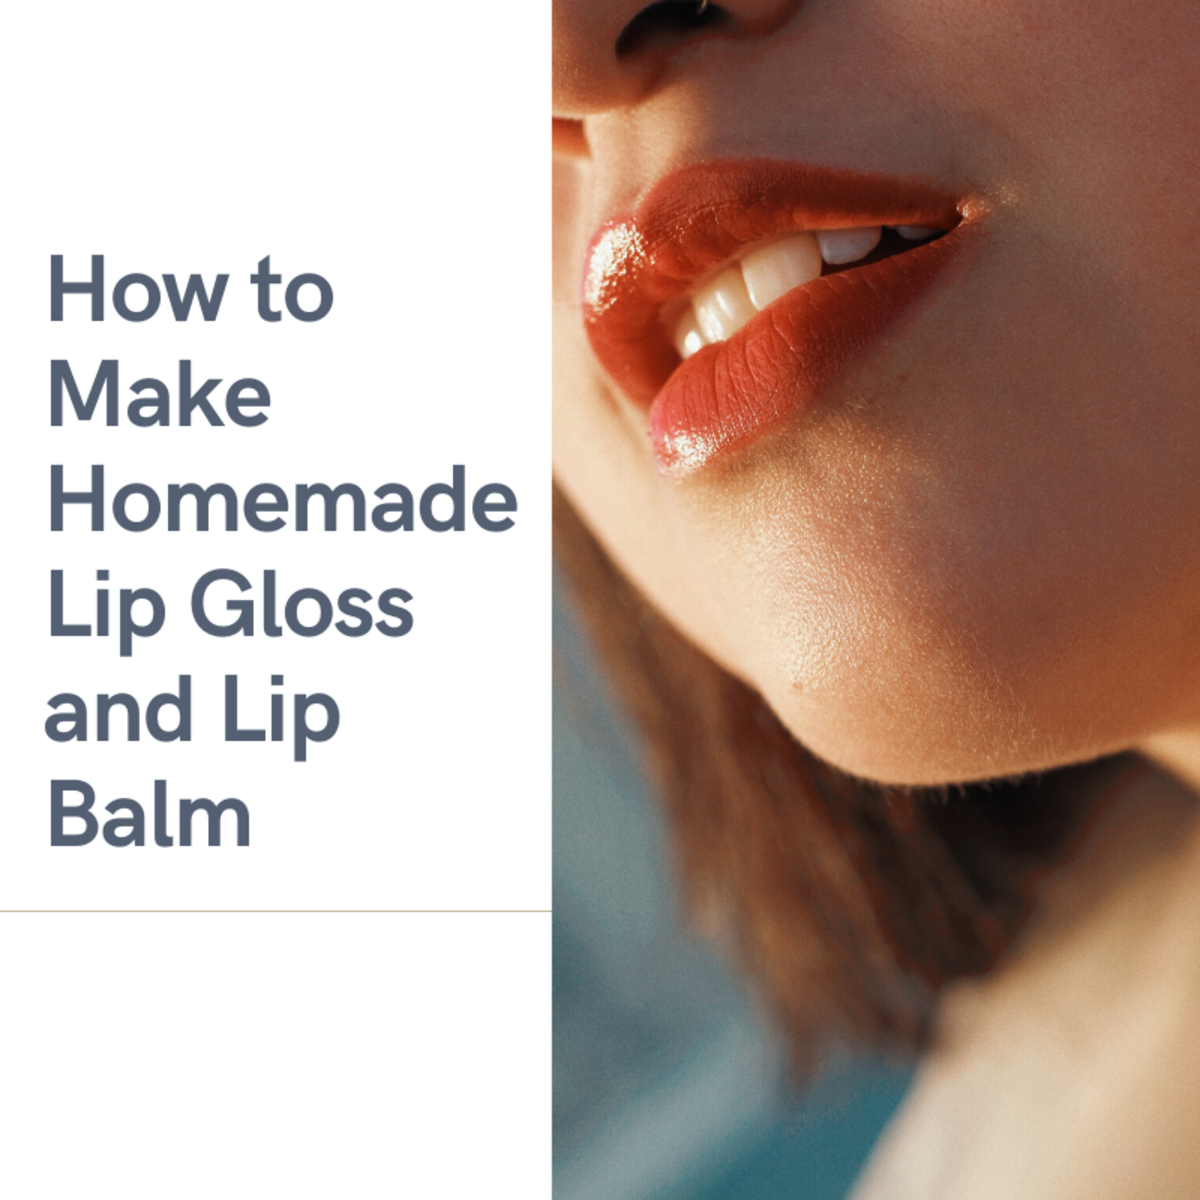 Make your own homemade lip gloss and lip balm and save time and money.